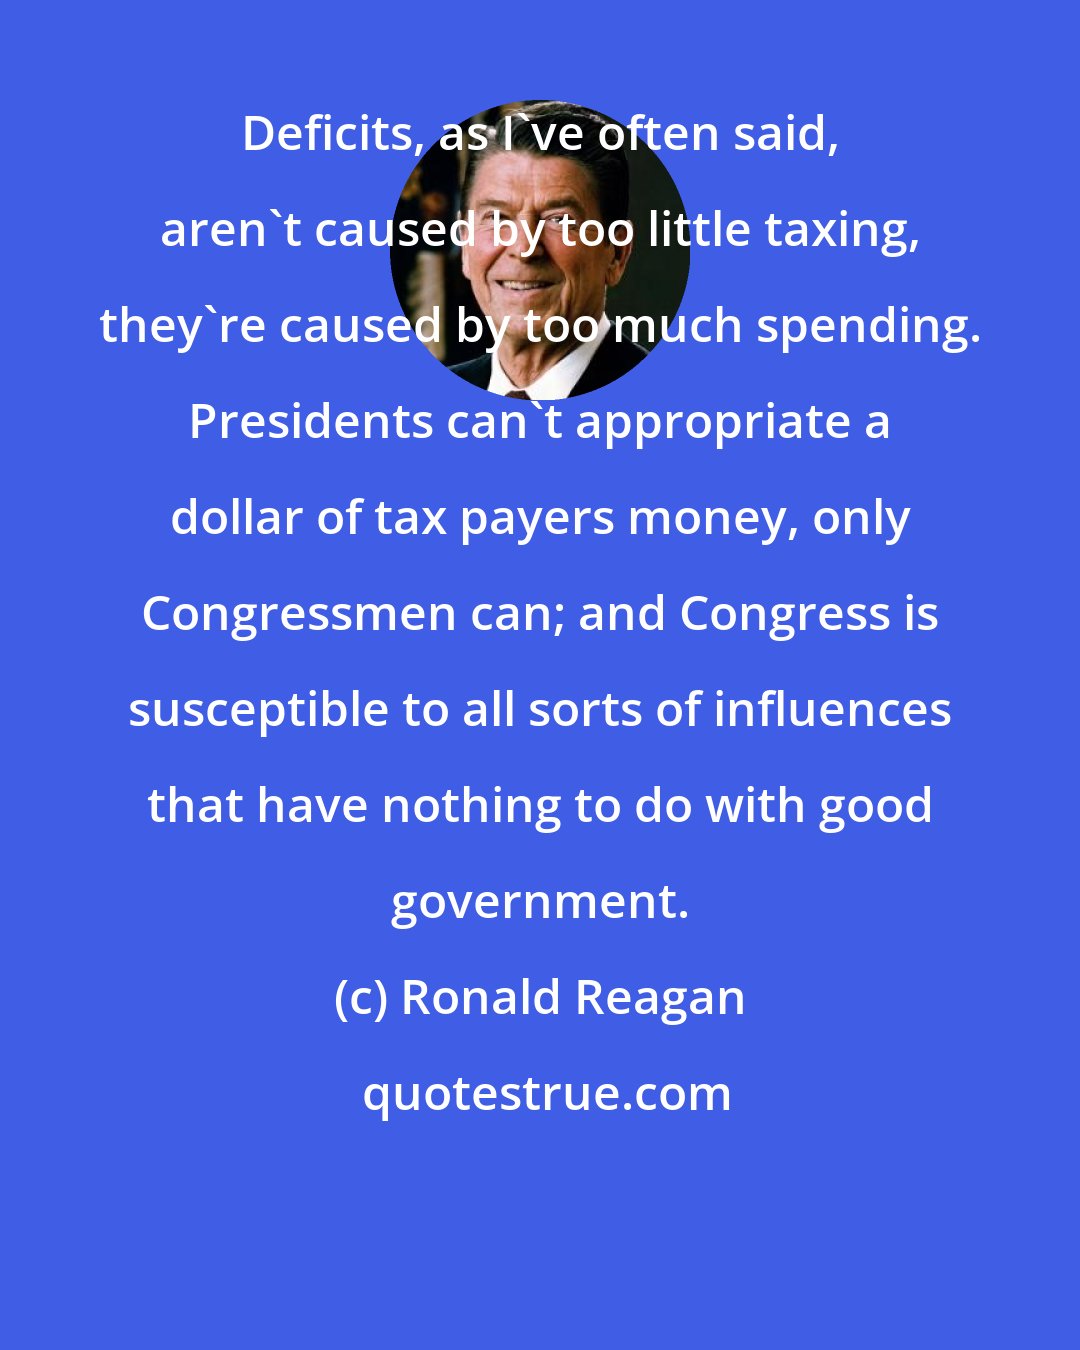 Ronald Reagan: Deficits, as I've often said, aren't caused by too little taxing, they're caused by too much spending. Presidents can't appropriate a dollar of tax payers money, only Congressmen can; and Congress is susceptible to all sorts of influences that have nothing to do with good government.